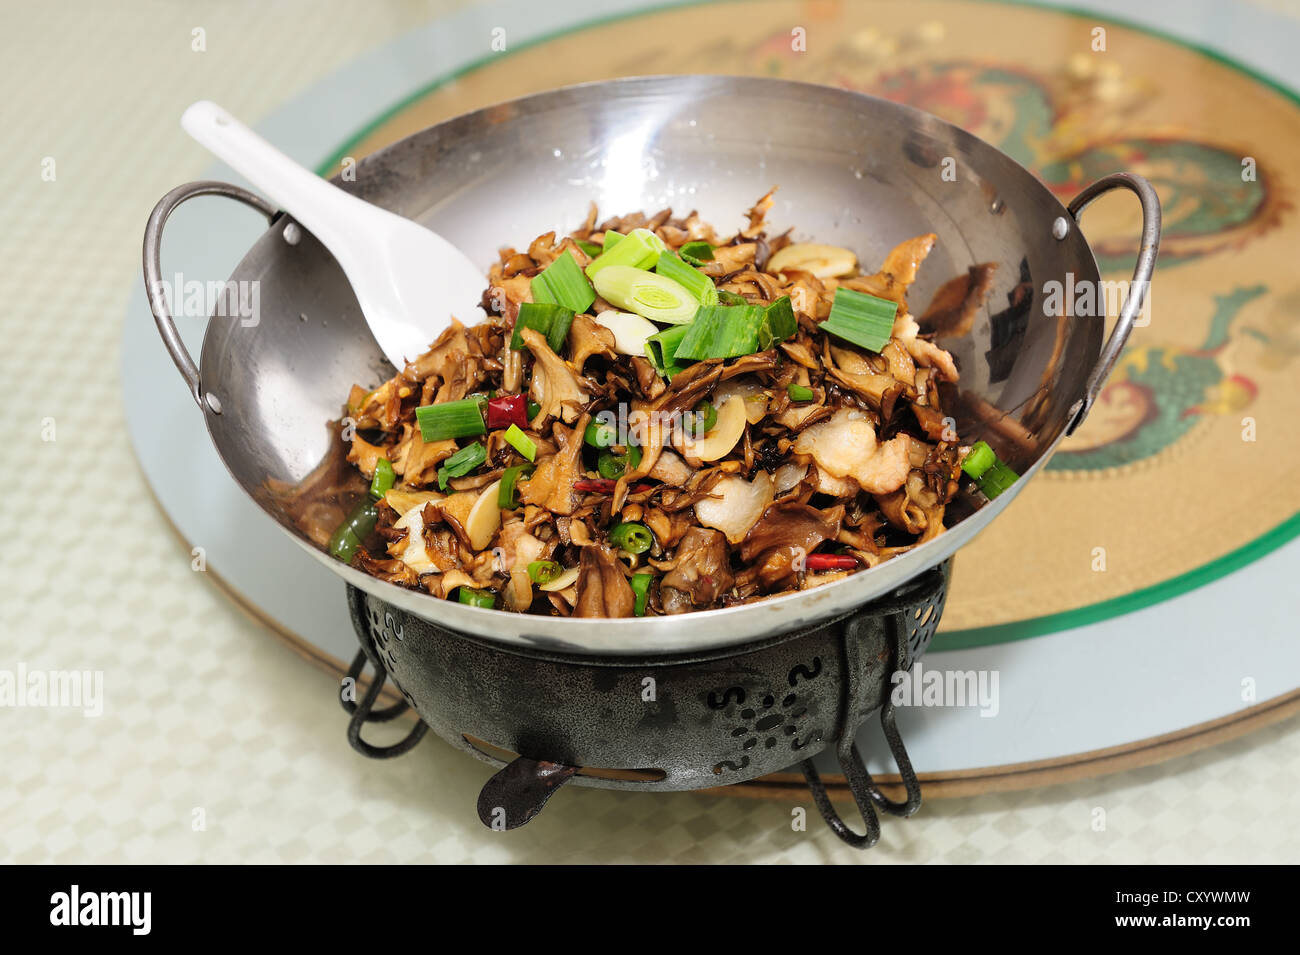 Chinese Hunan cuisine - griddle cooked wild mushrooms Stock Photo